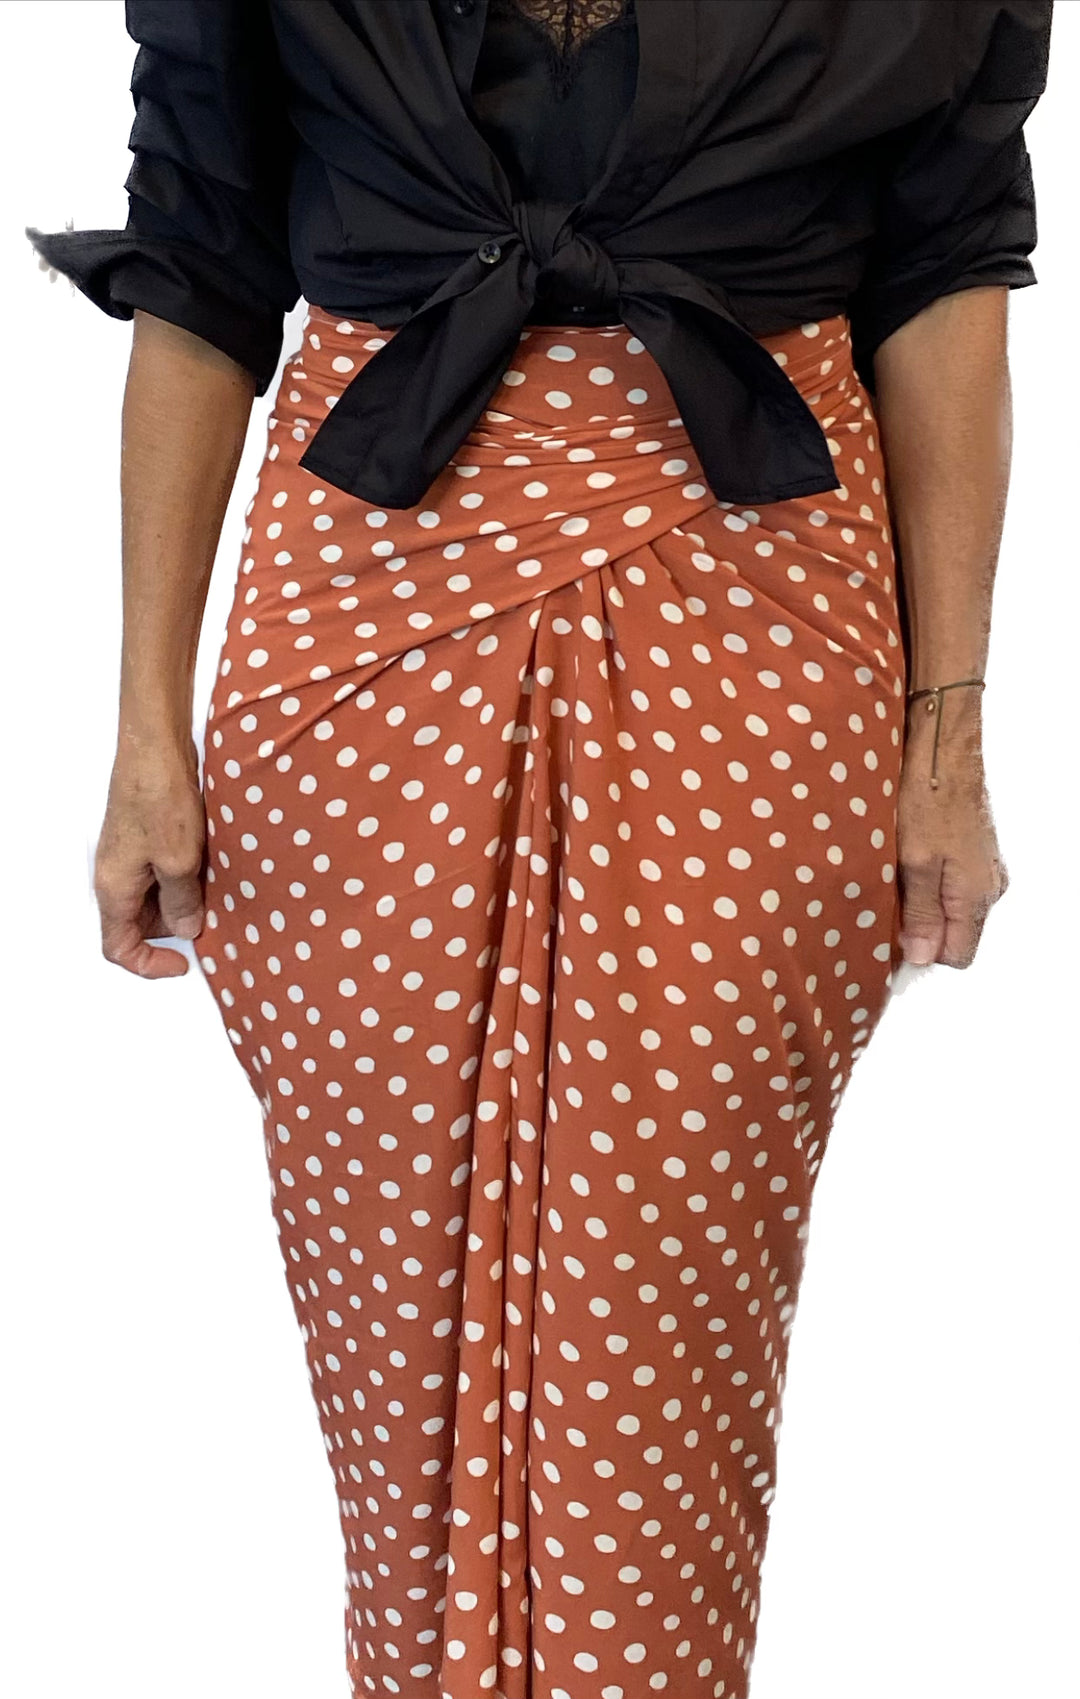 Japanese Wrap Skirt - Rich Coral with Cream Spots. Silk/Viscose